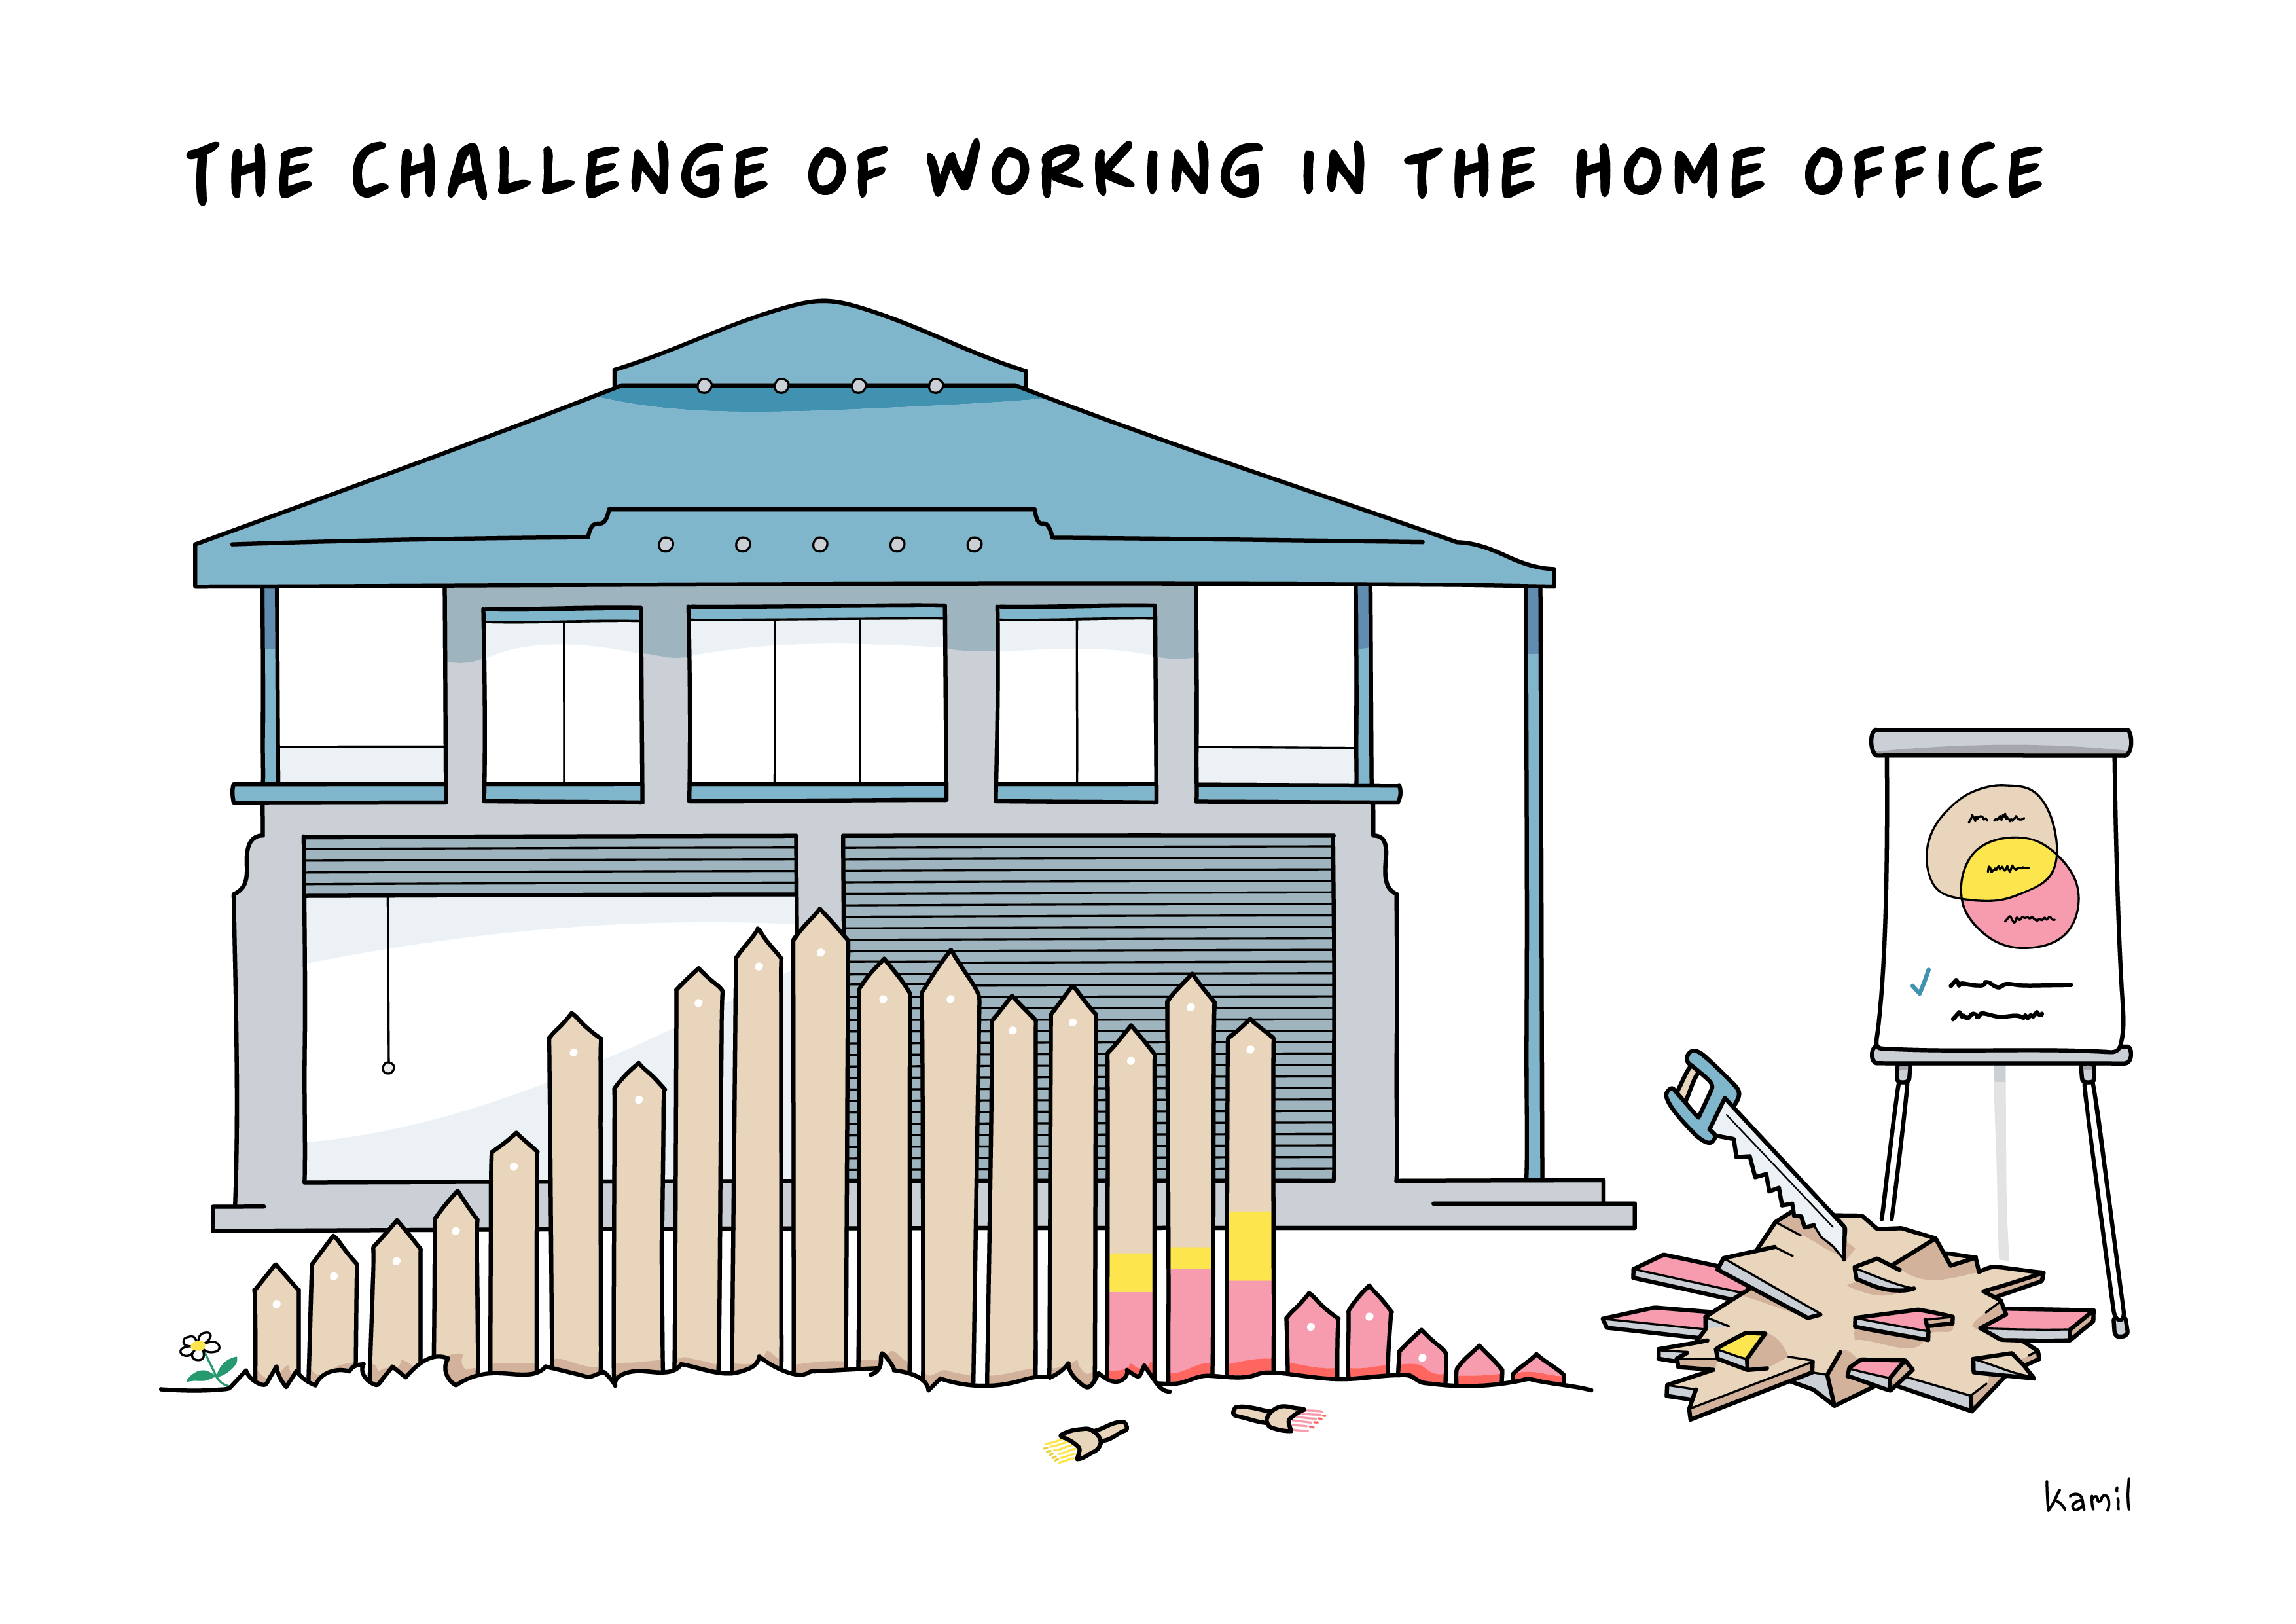 The Challenge of Working in the Home Office